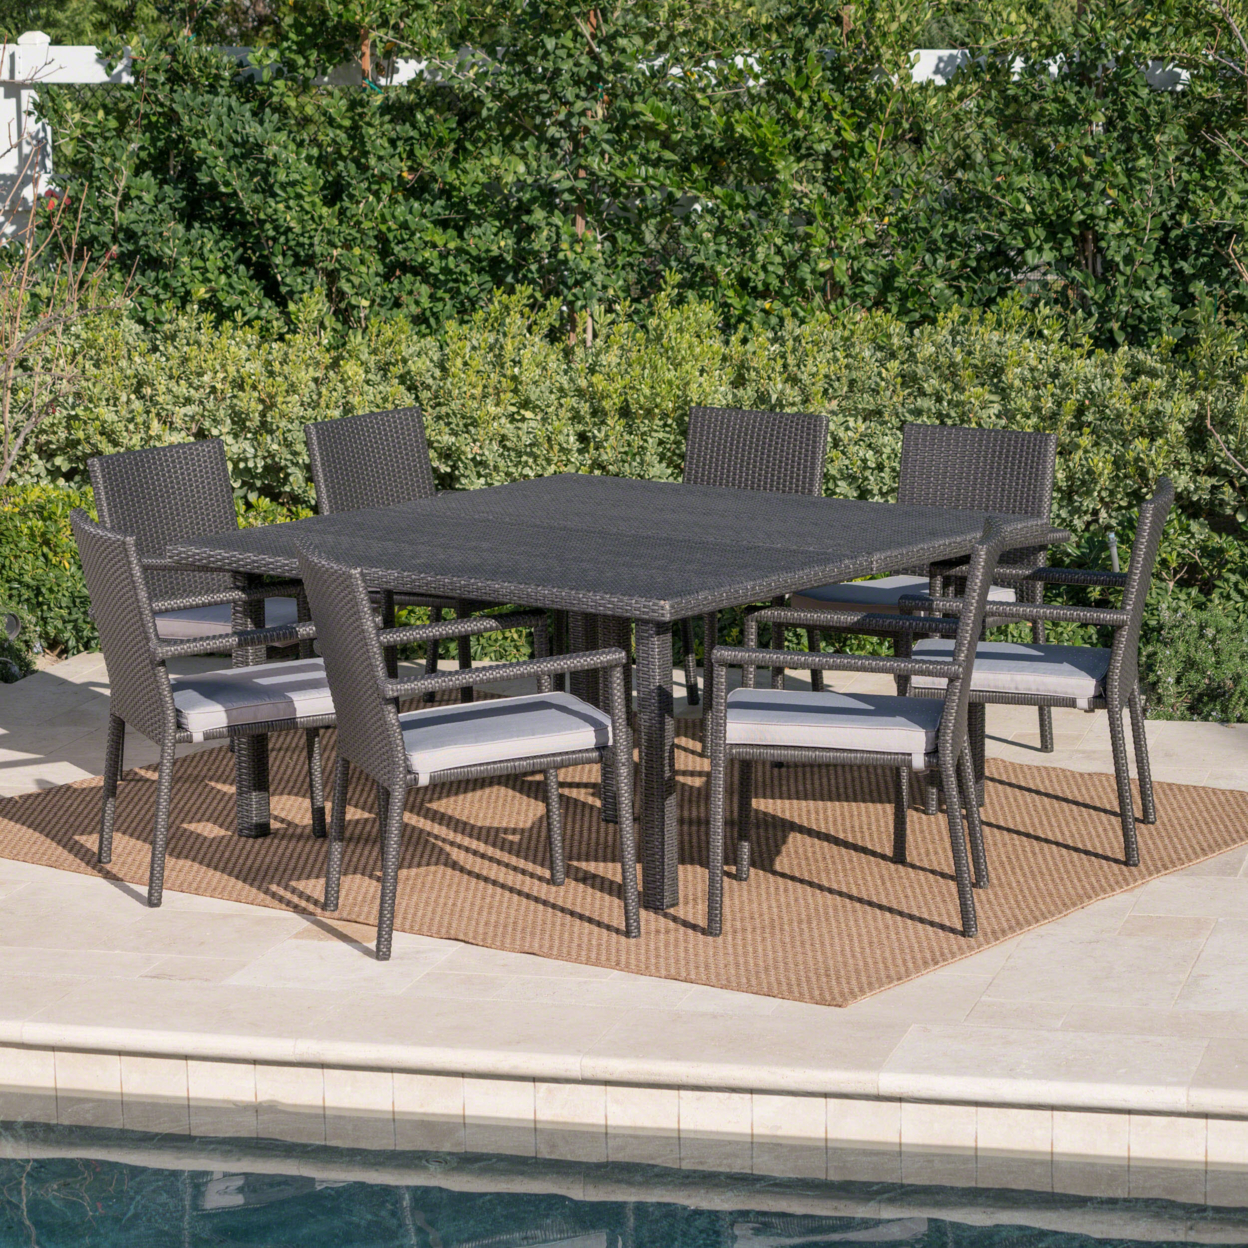 Bunny Outdoor 9 Piece Wicker Dining Set With Water Resistant Cushions - Gray/Silver